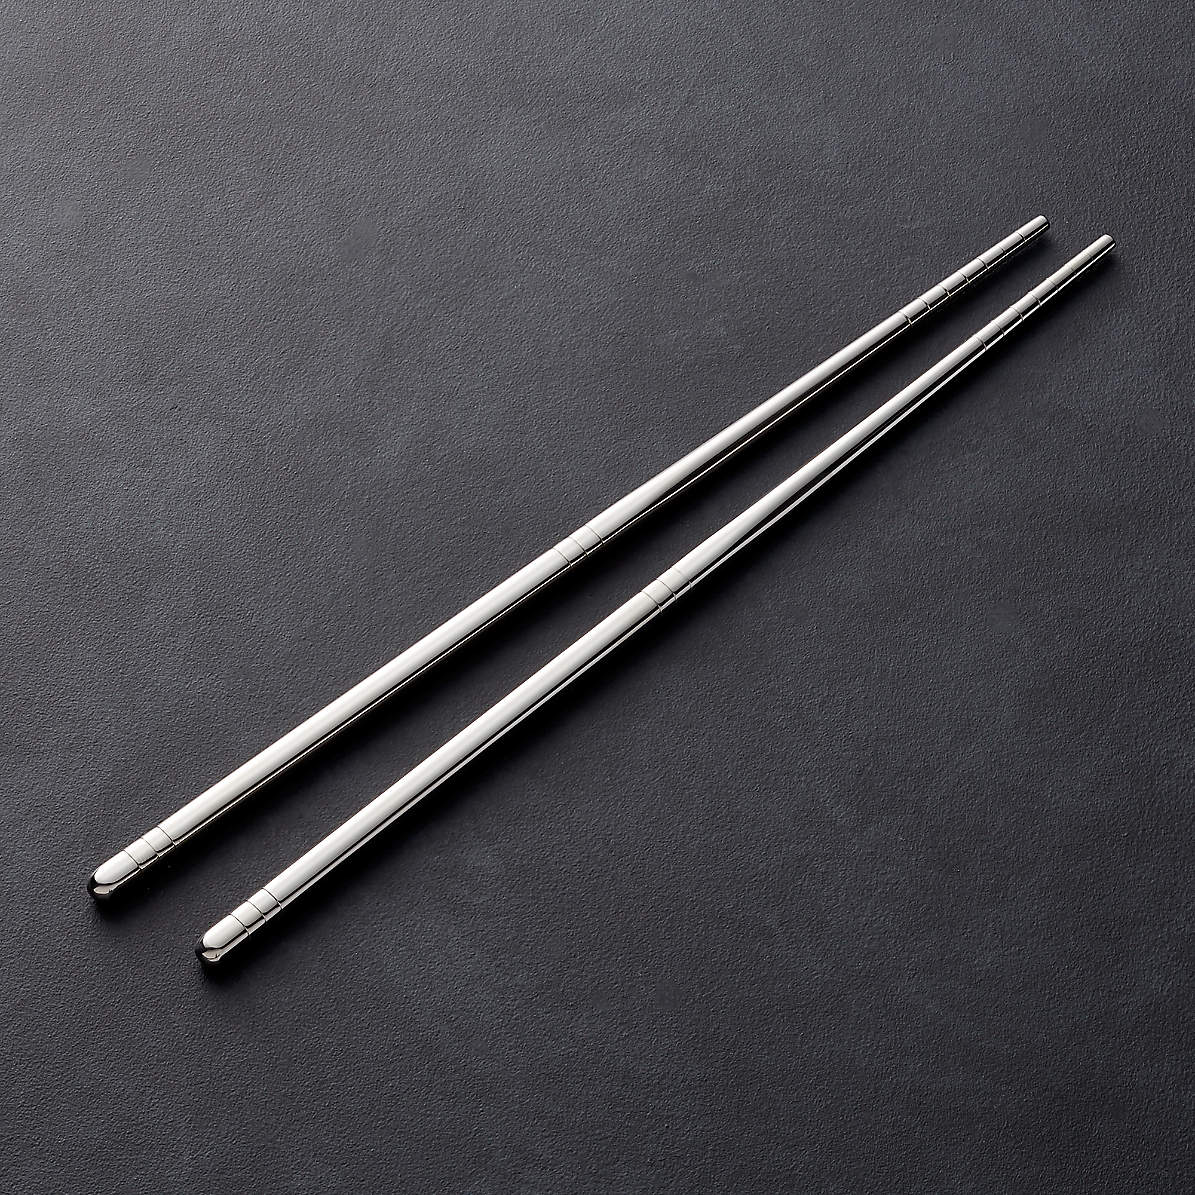 5 Pairs 10 Pcs High Quality Tapered Silver Stainless Steel Chopsticks 